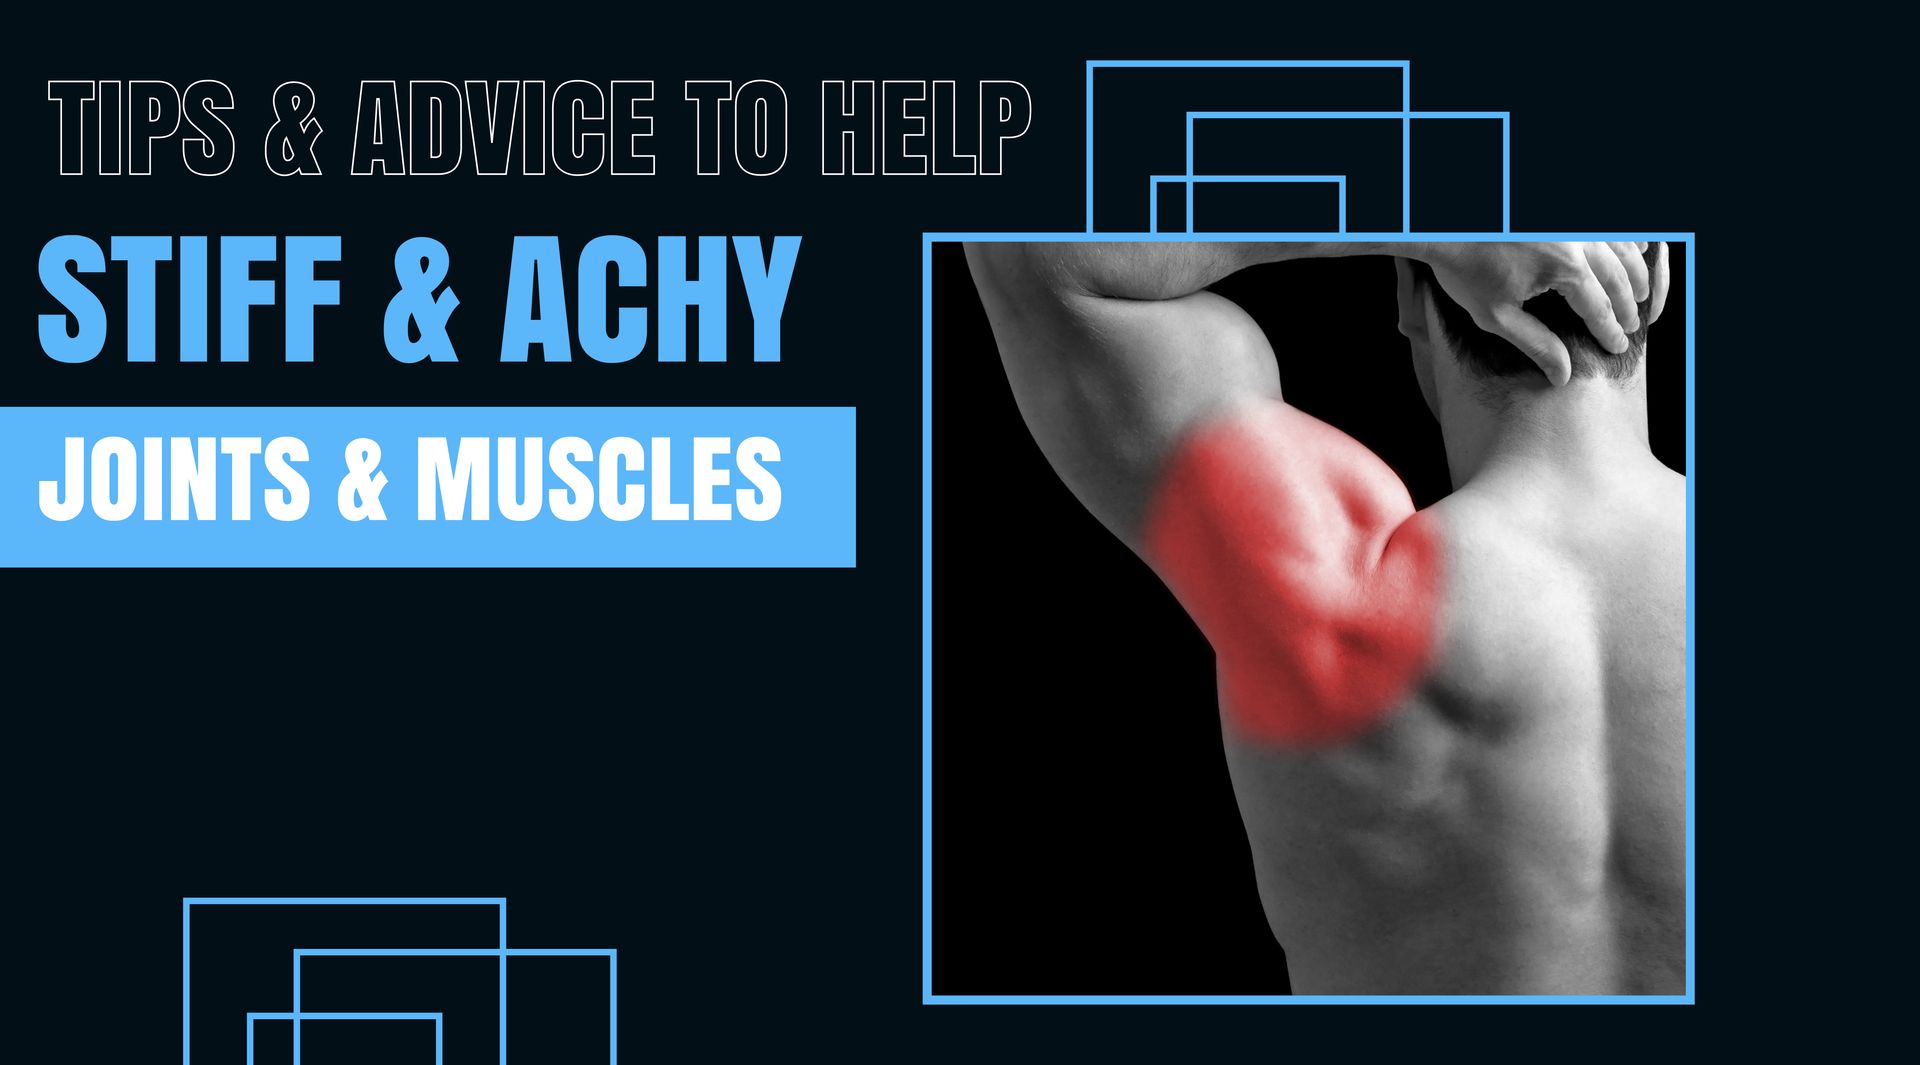 Tips and Advice to Help Stiff and Achy Joints and Muscles